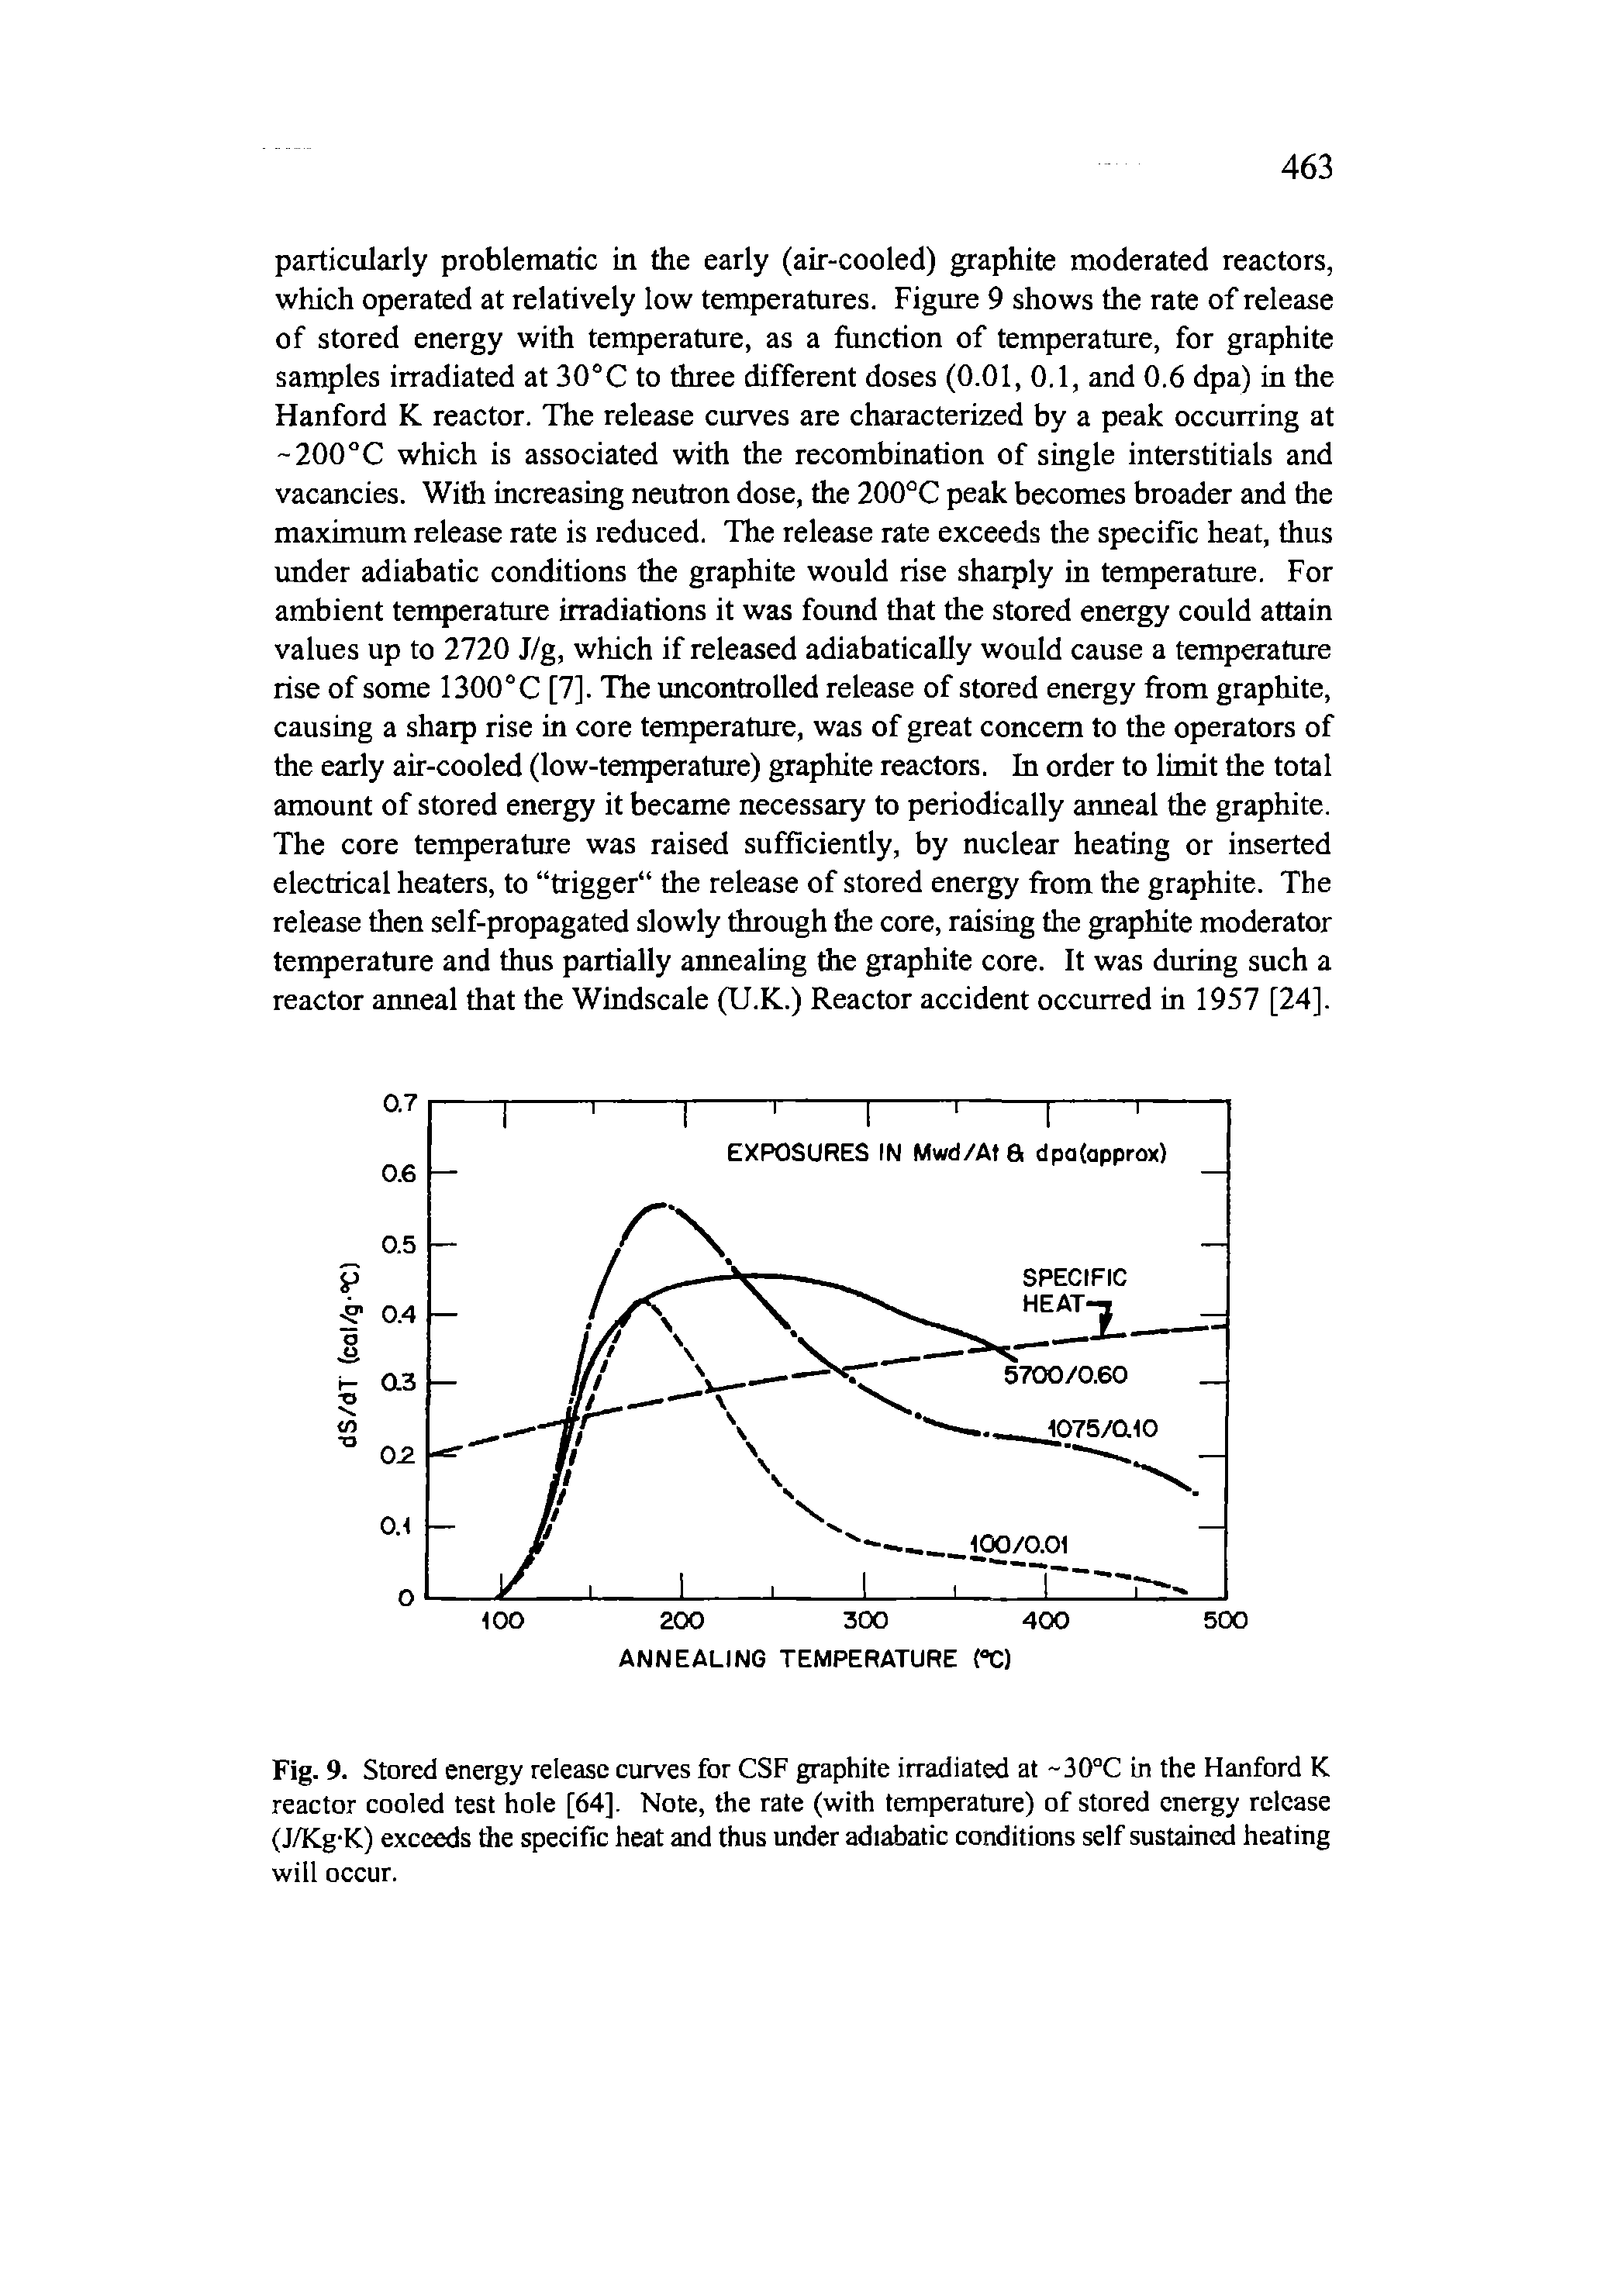 Fig. 9. Stored energy release curves for CSF graphite irradiated at 30°C in the Hanford K reactor cooled test hole [64], Note, the rate (with temperature) of stored energy release (J/Kg-K) exceeds the specific heat and thus under adiabatic conditions self sustained heating will occur.